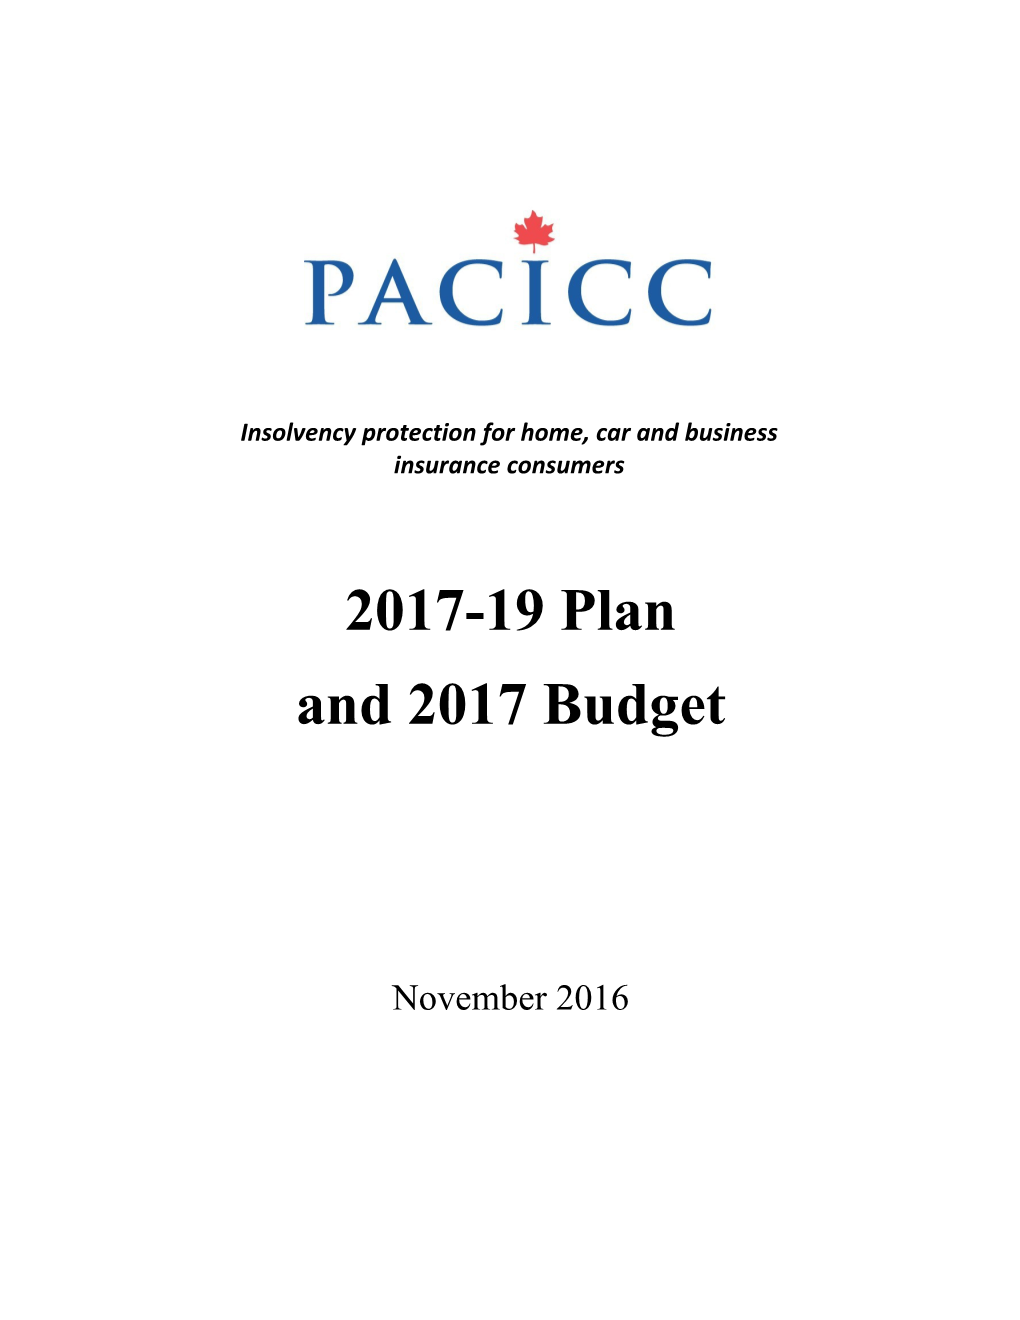 The PACICC Strategic Plan for 2004 to 2006